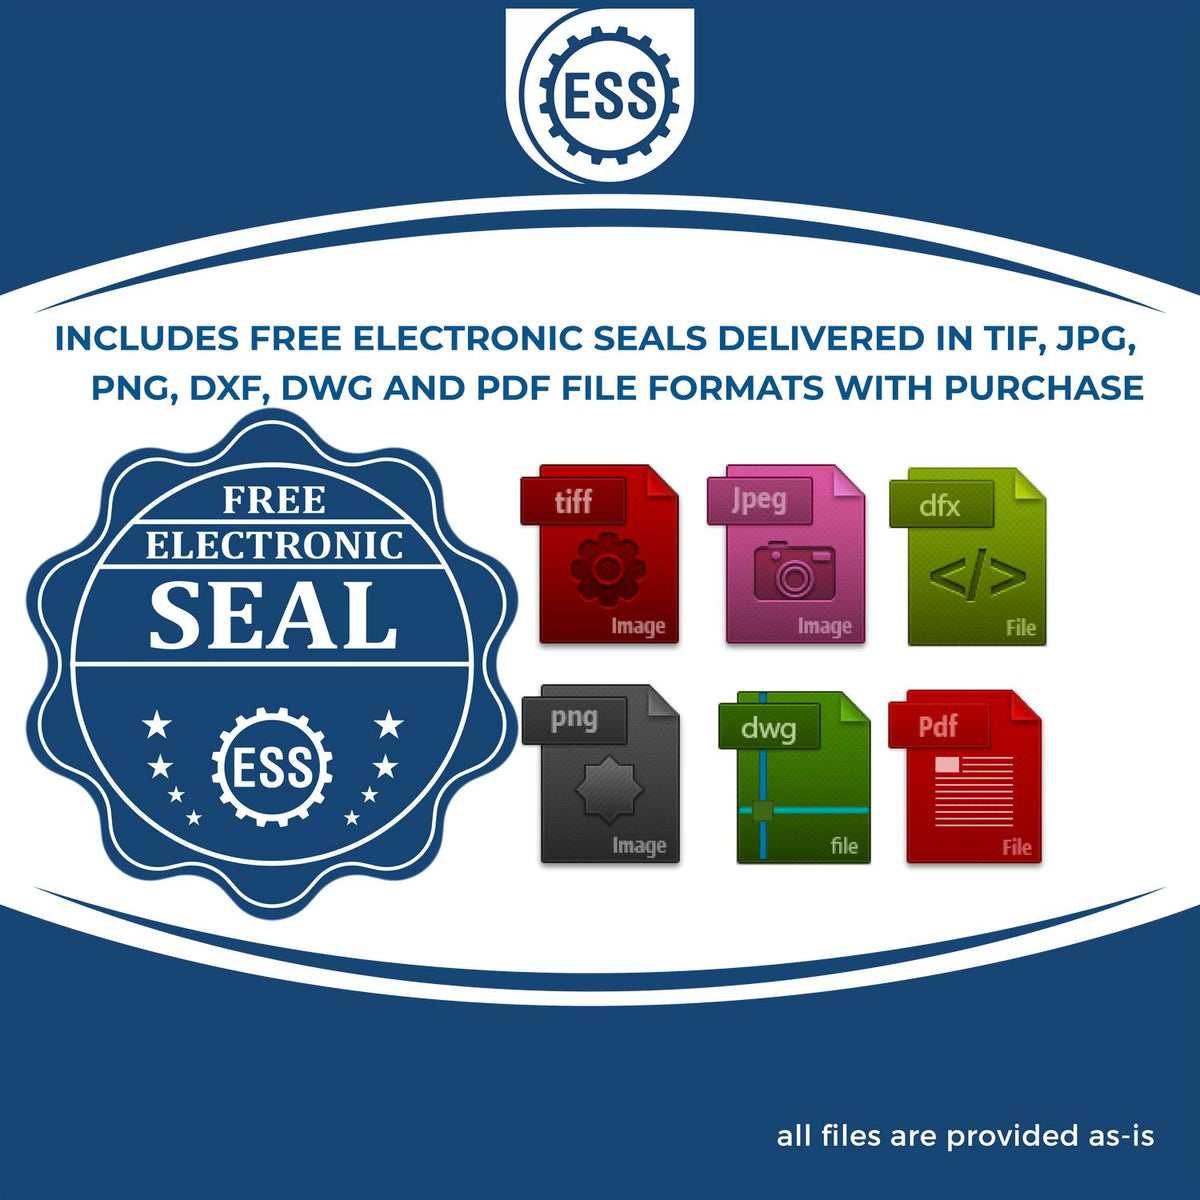 An infographic for the free electronic seal for the State of New York Long Reach Architectural Embossing Seal illustrating the different file type icons such as DXF, DWG, TIF, JPG and PNG.